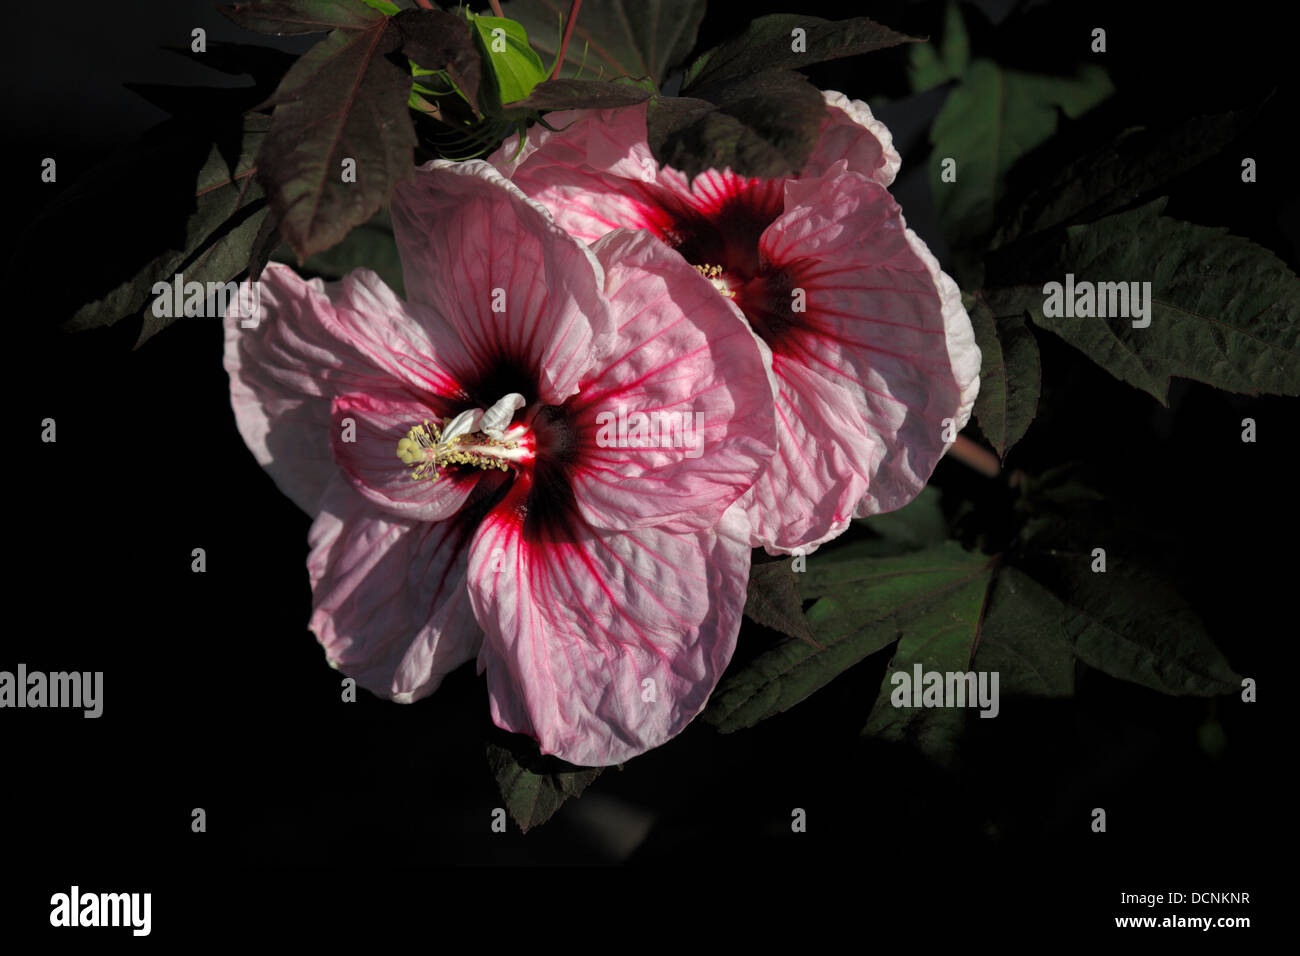 Pink and purple hibiscus flowers. Stock Photo